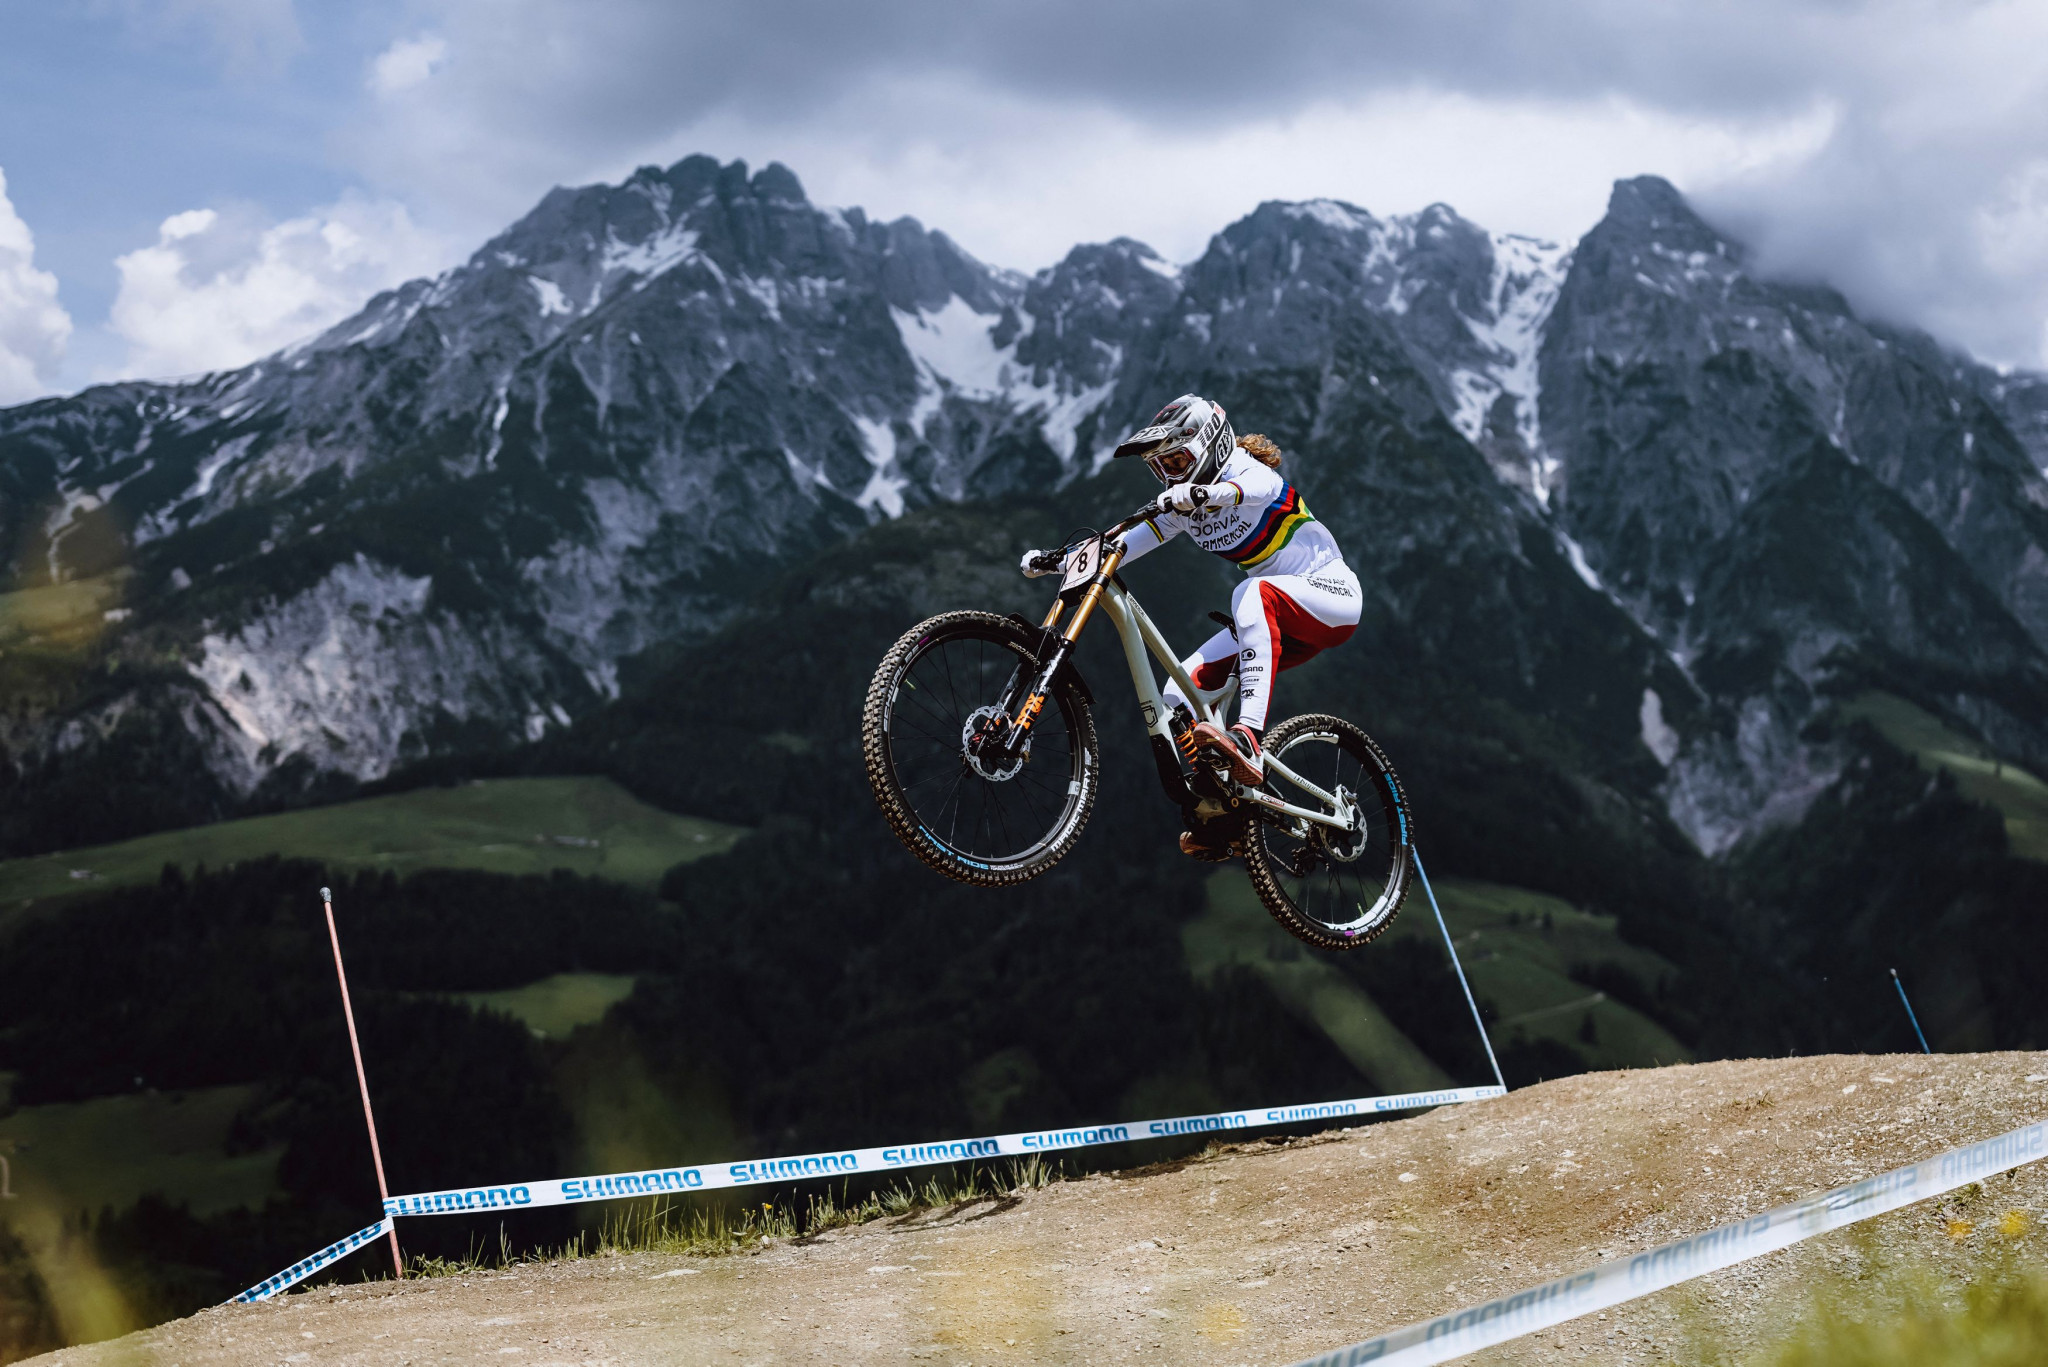 Winning start for Balanche and Pierron at UCI Mountain Bike World Cup in Lourdes